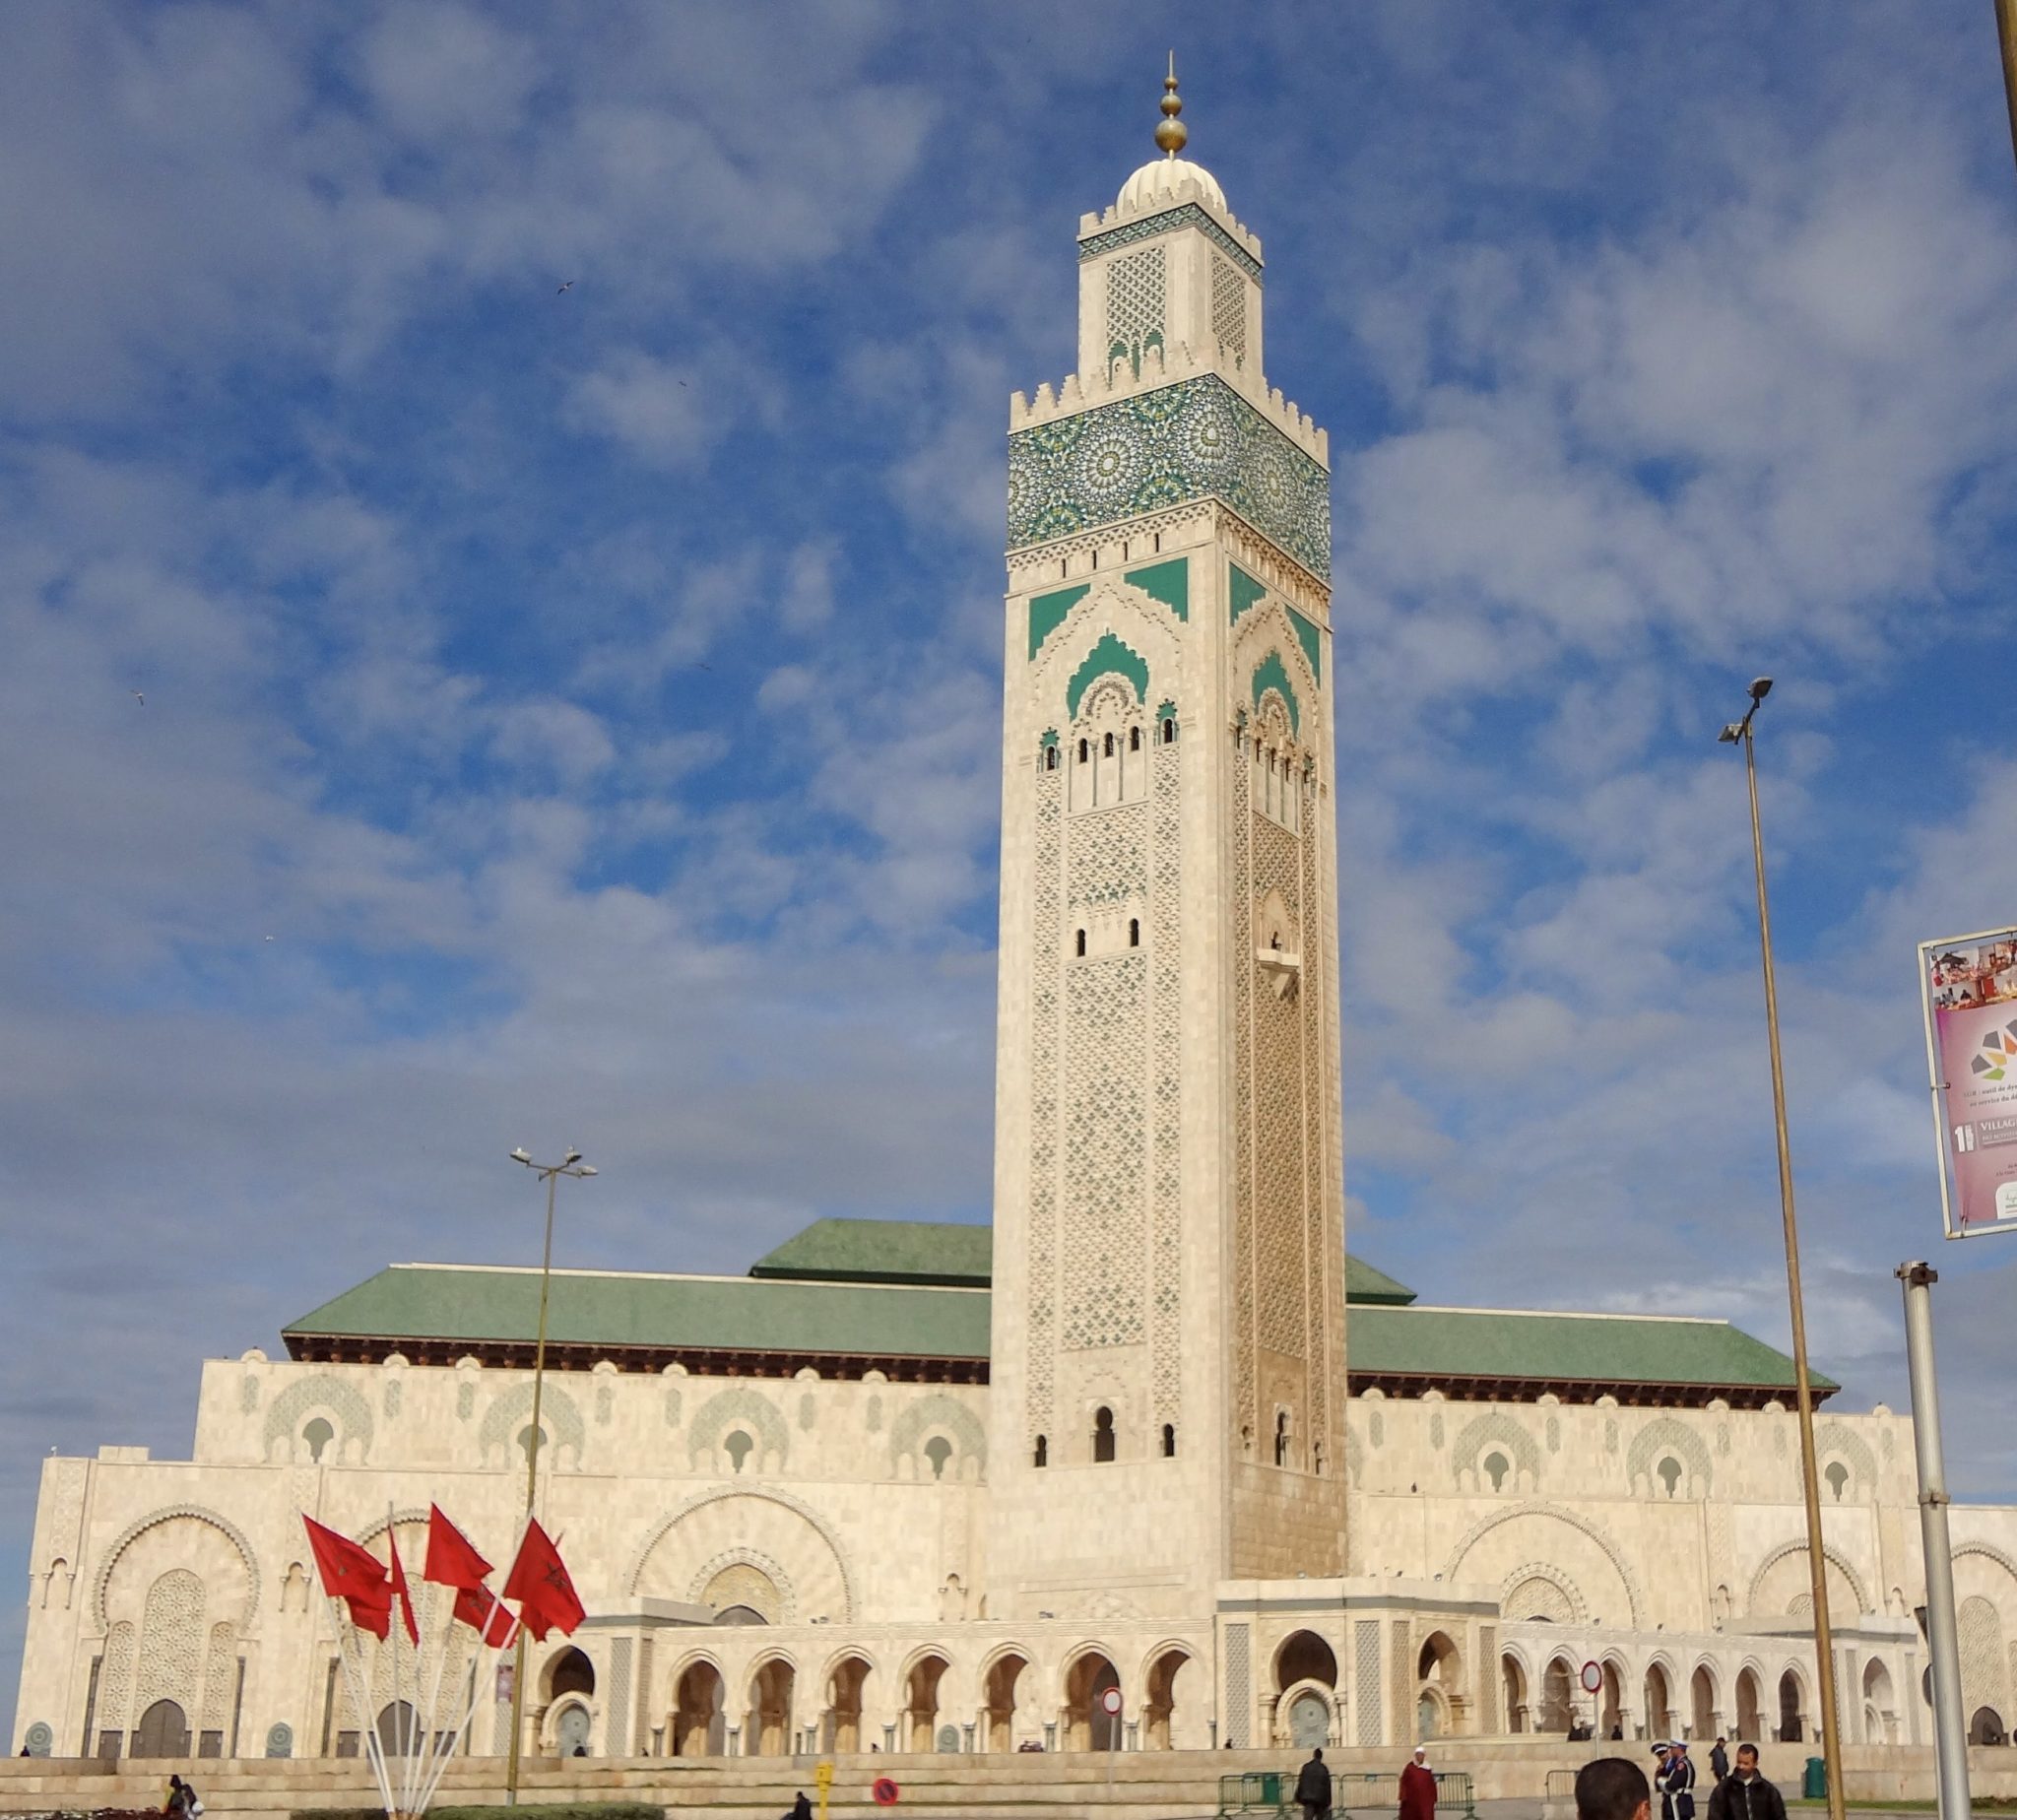 The outside of Hassan II Mosque, Casablanca, Morocco